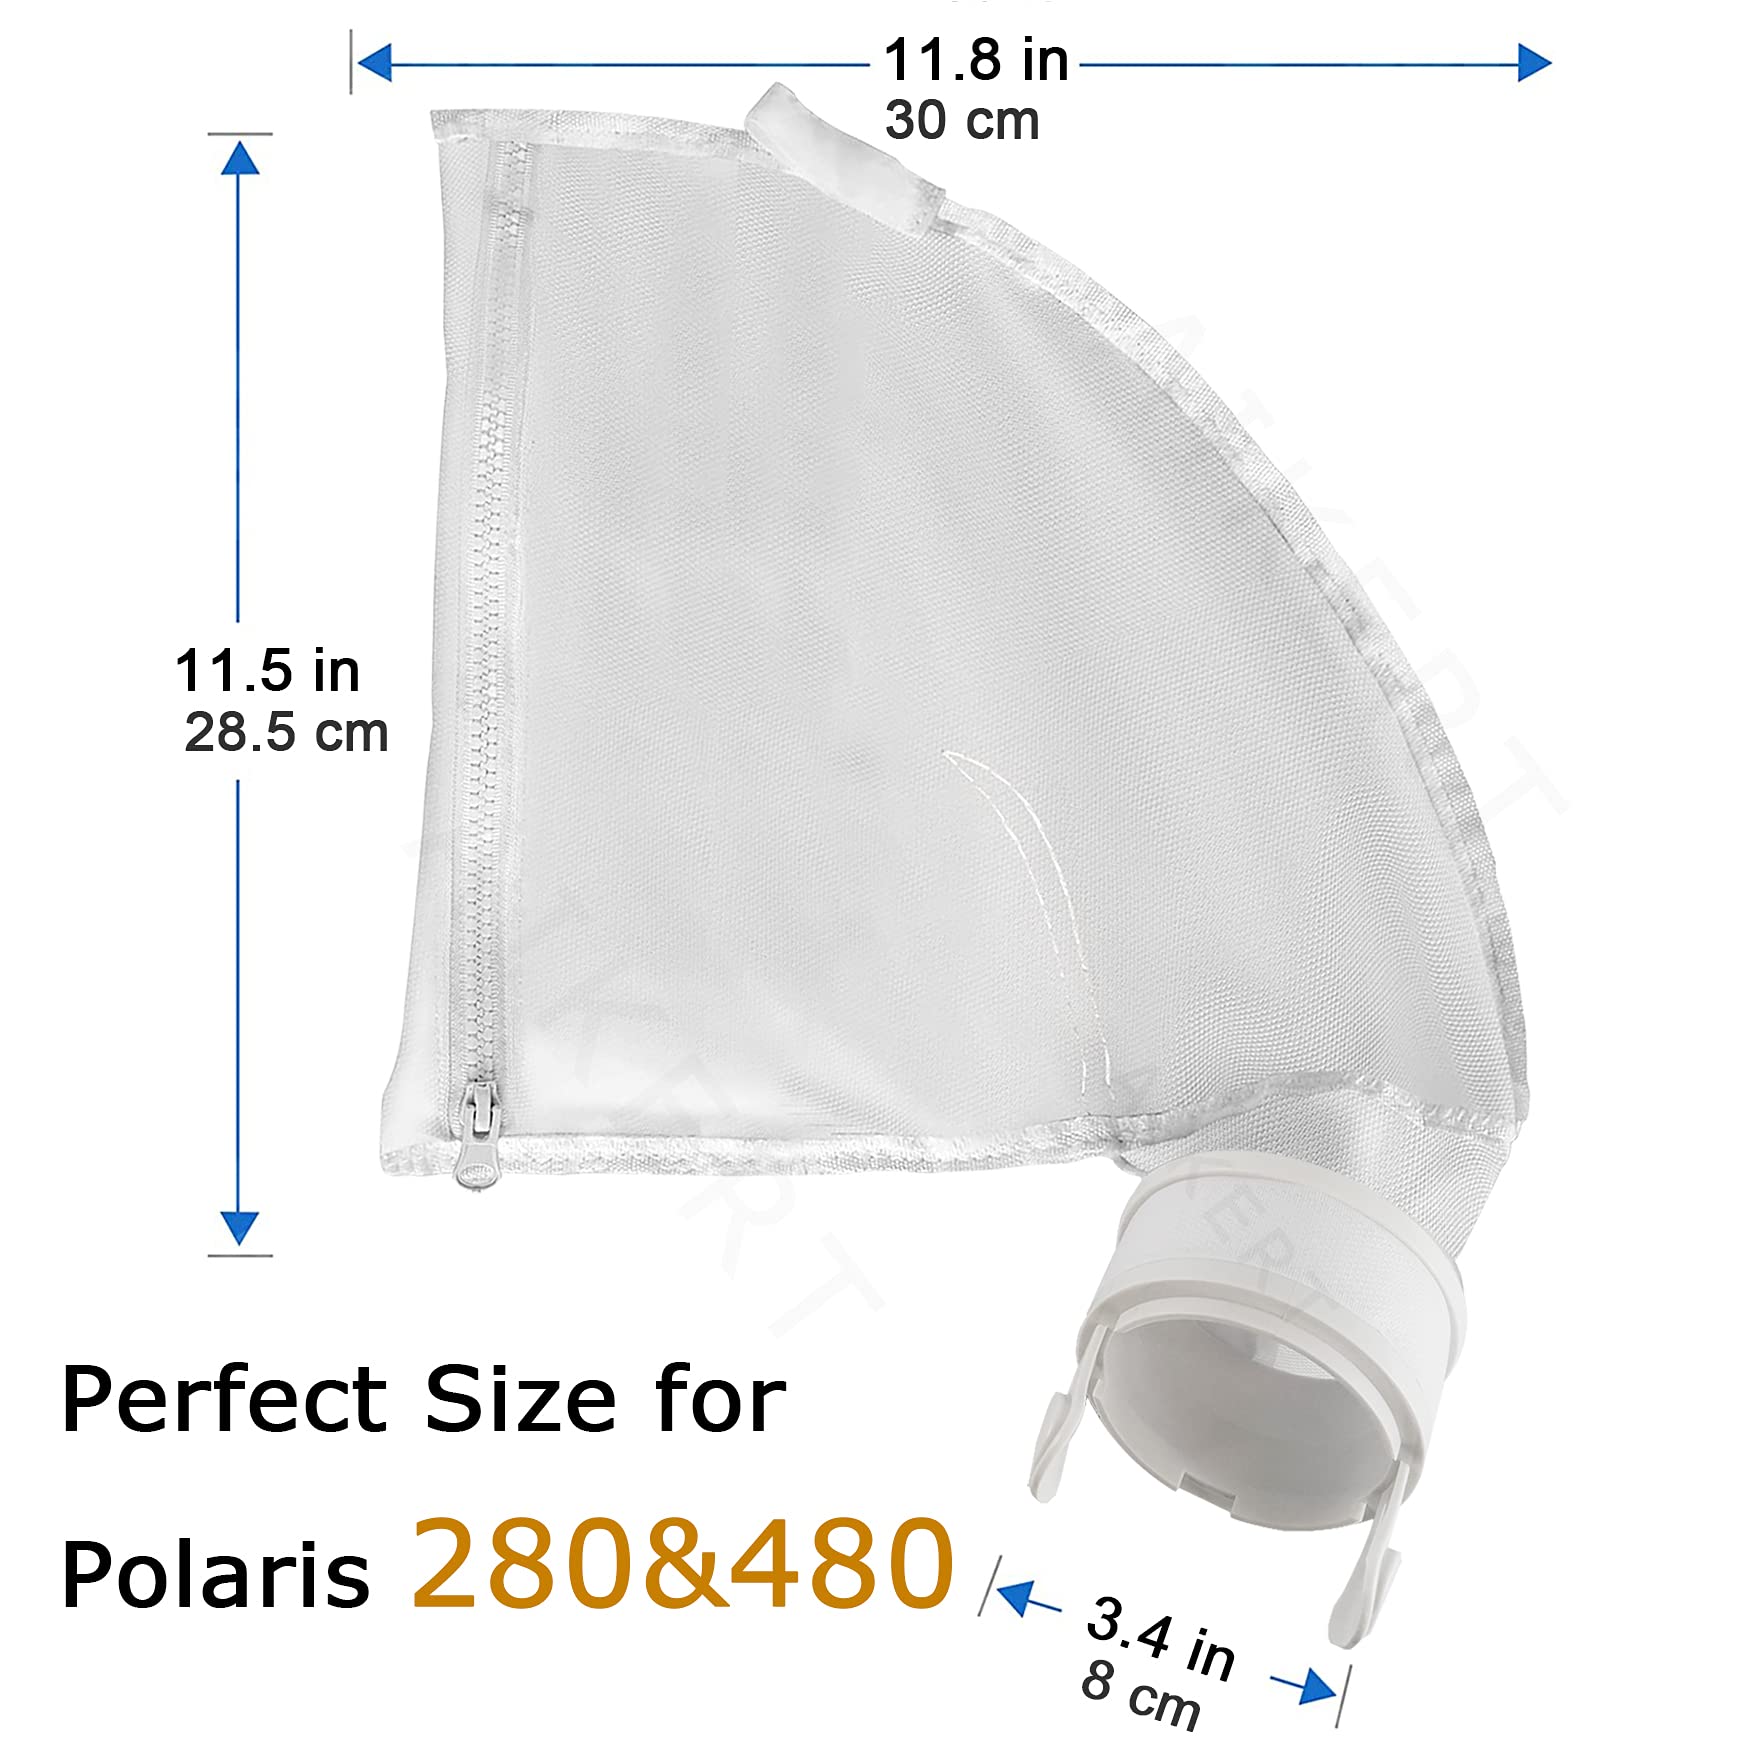 Aikert Pool Cleaner Bag for Polaris 280 Bag Replacement - Pool Cleaner Parts All Purpose Zippered Bags K13 for Polaris 280, 480/2 Pack